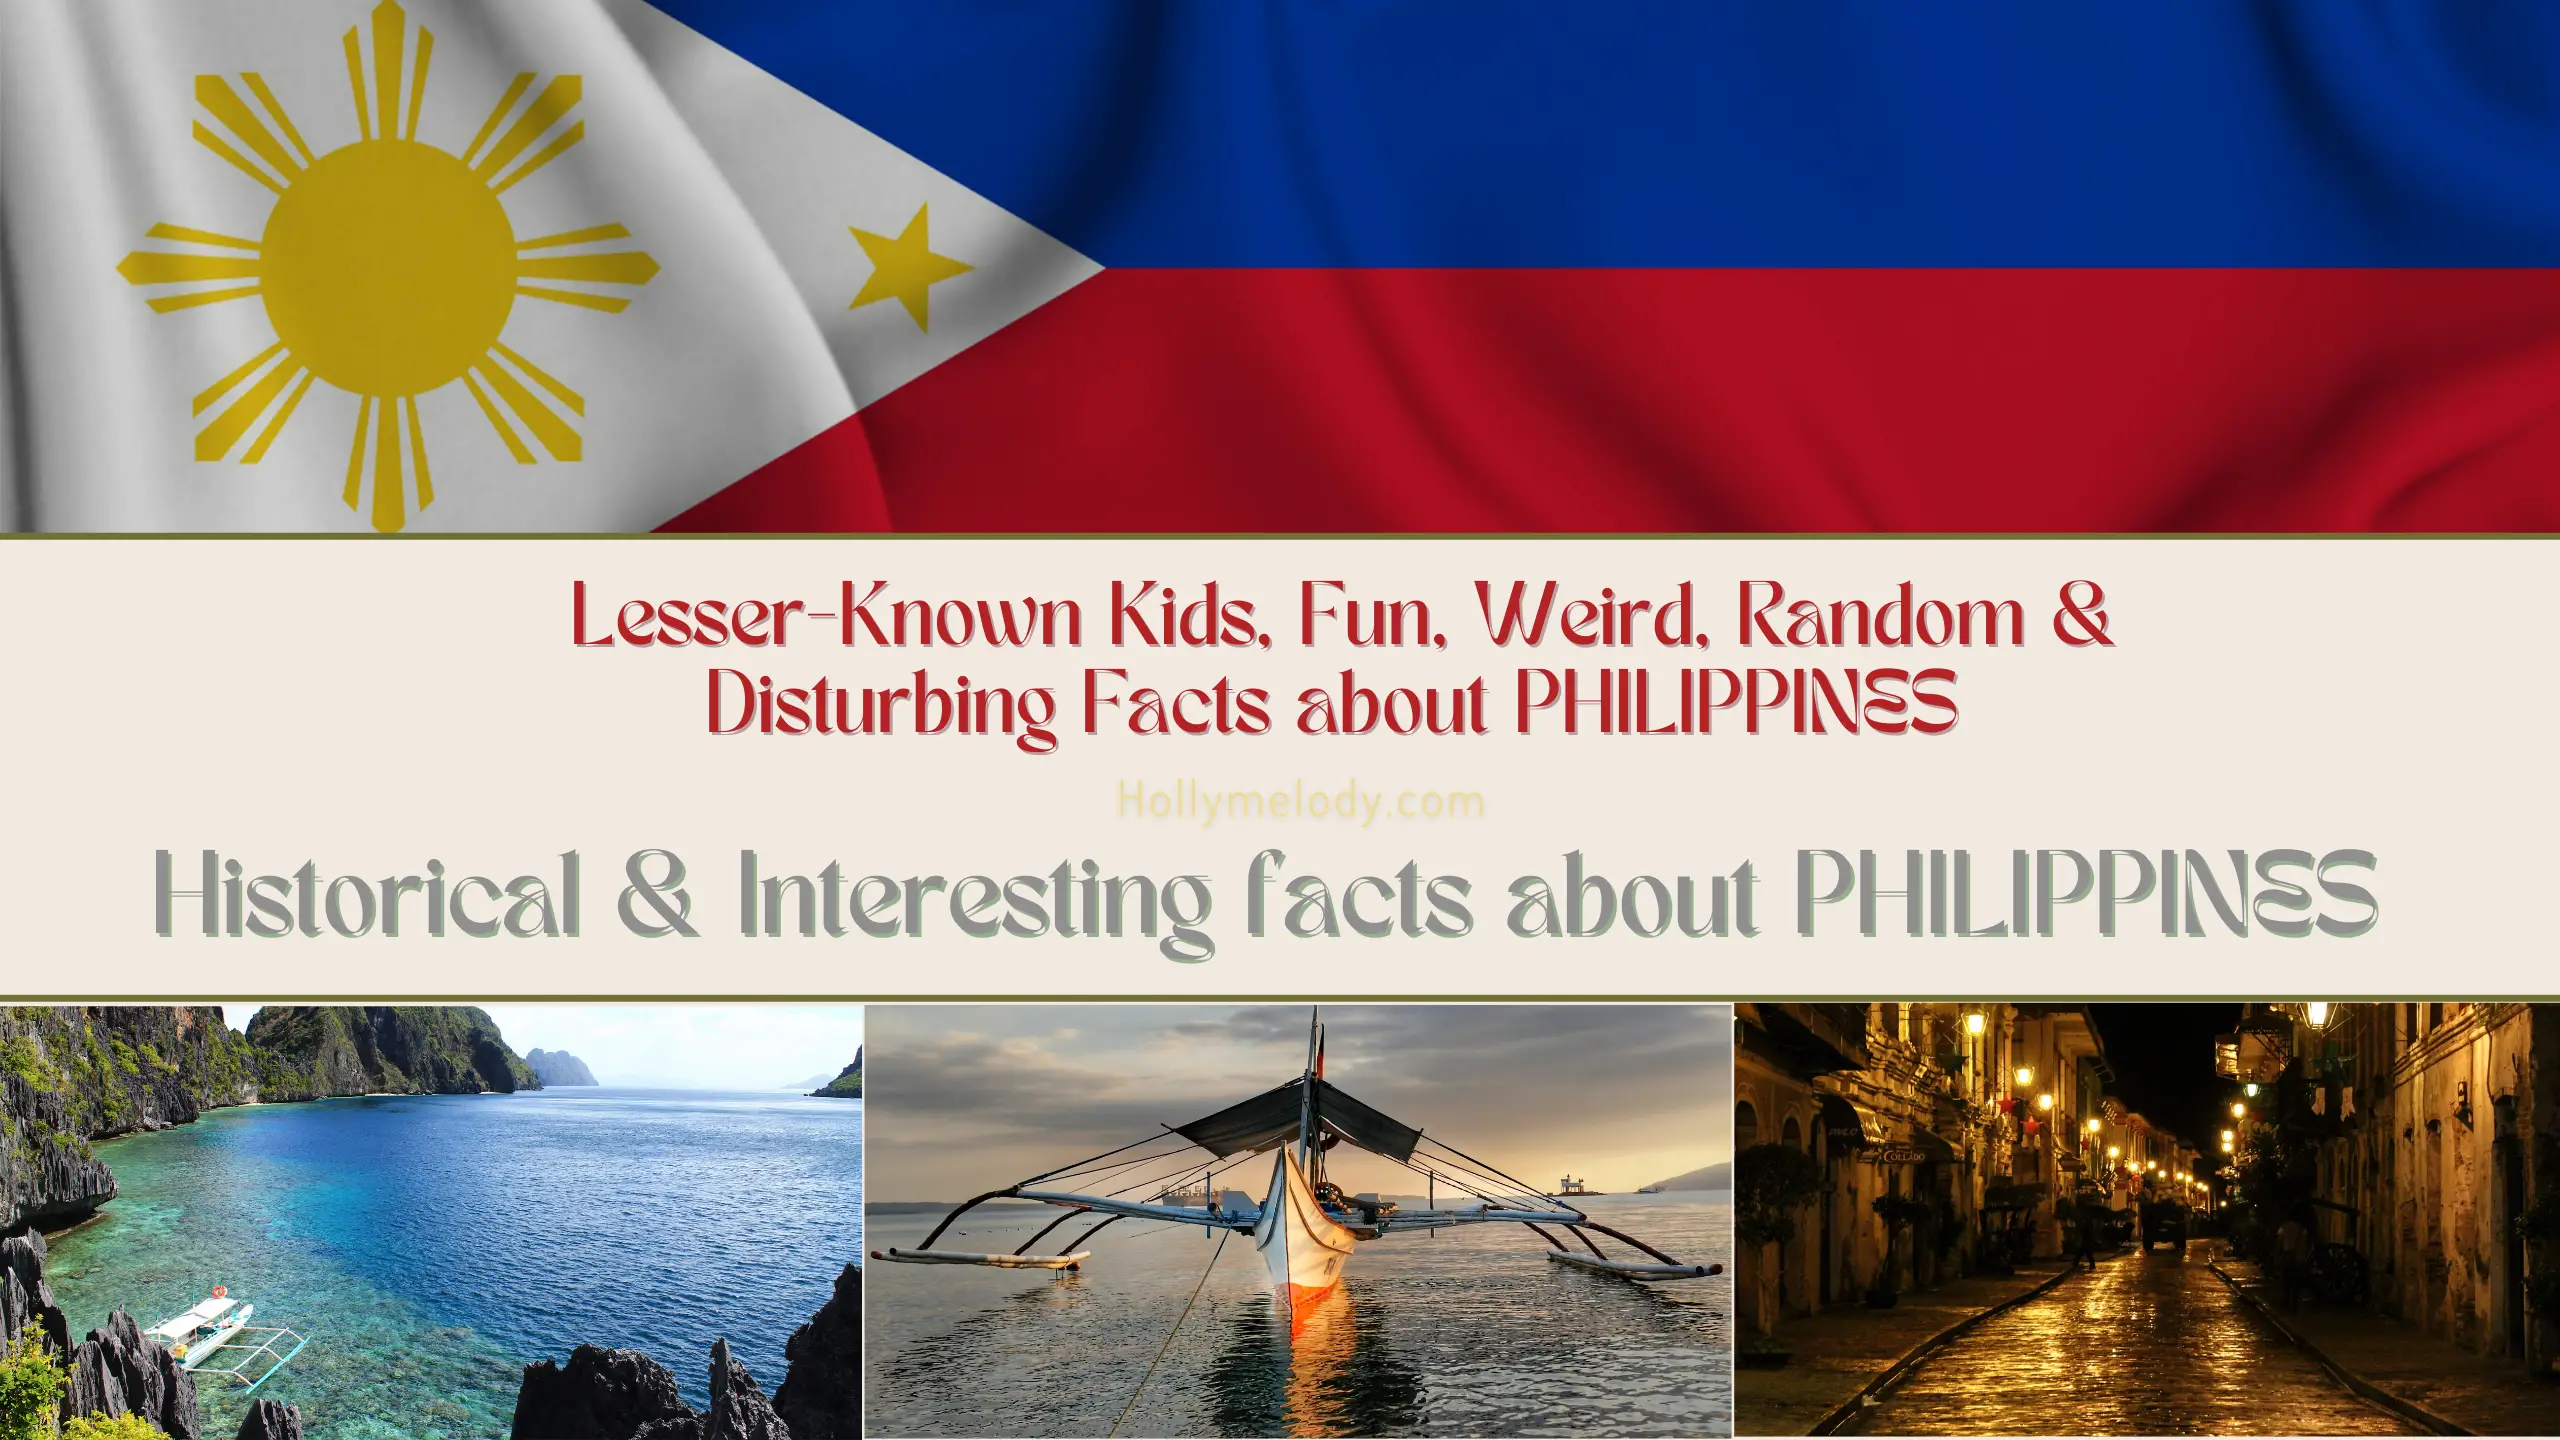 Interesting facts about PHILIPPINES History & Culture